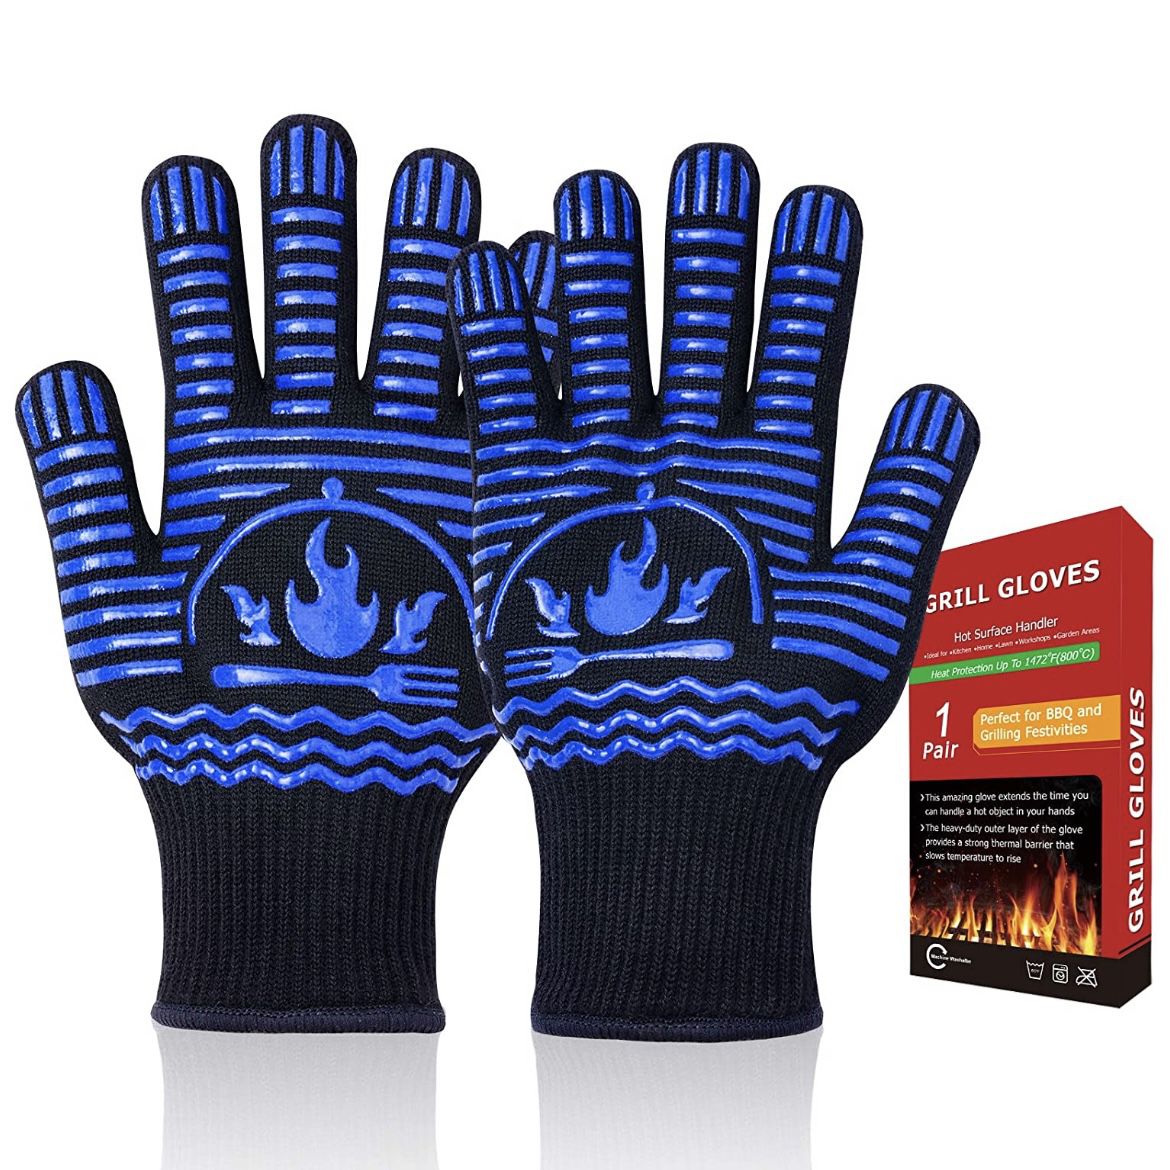 Oven Grill Gloves 1 Pair - Blue Black